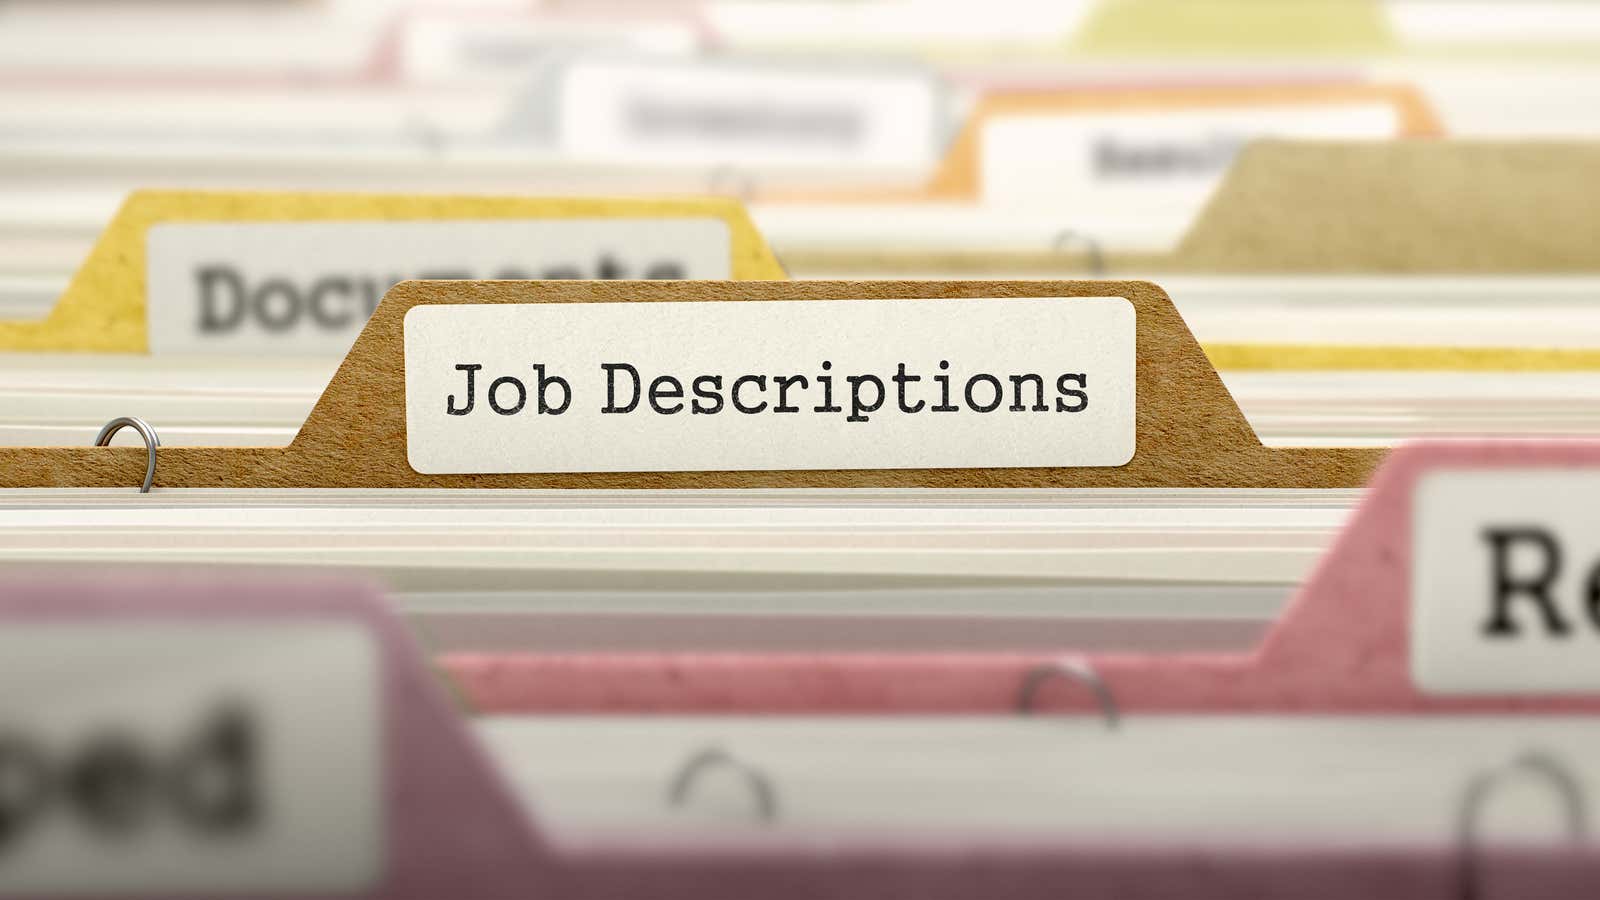 Many job descriptions are made of boiler plate language.